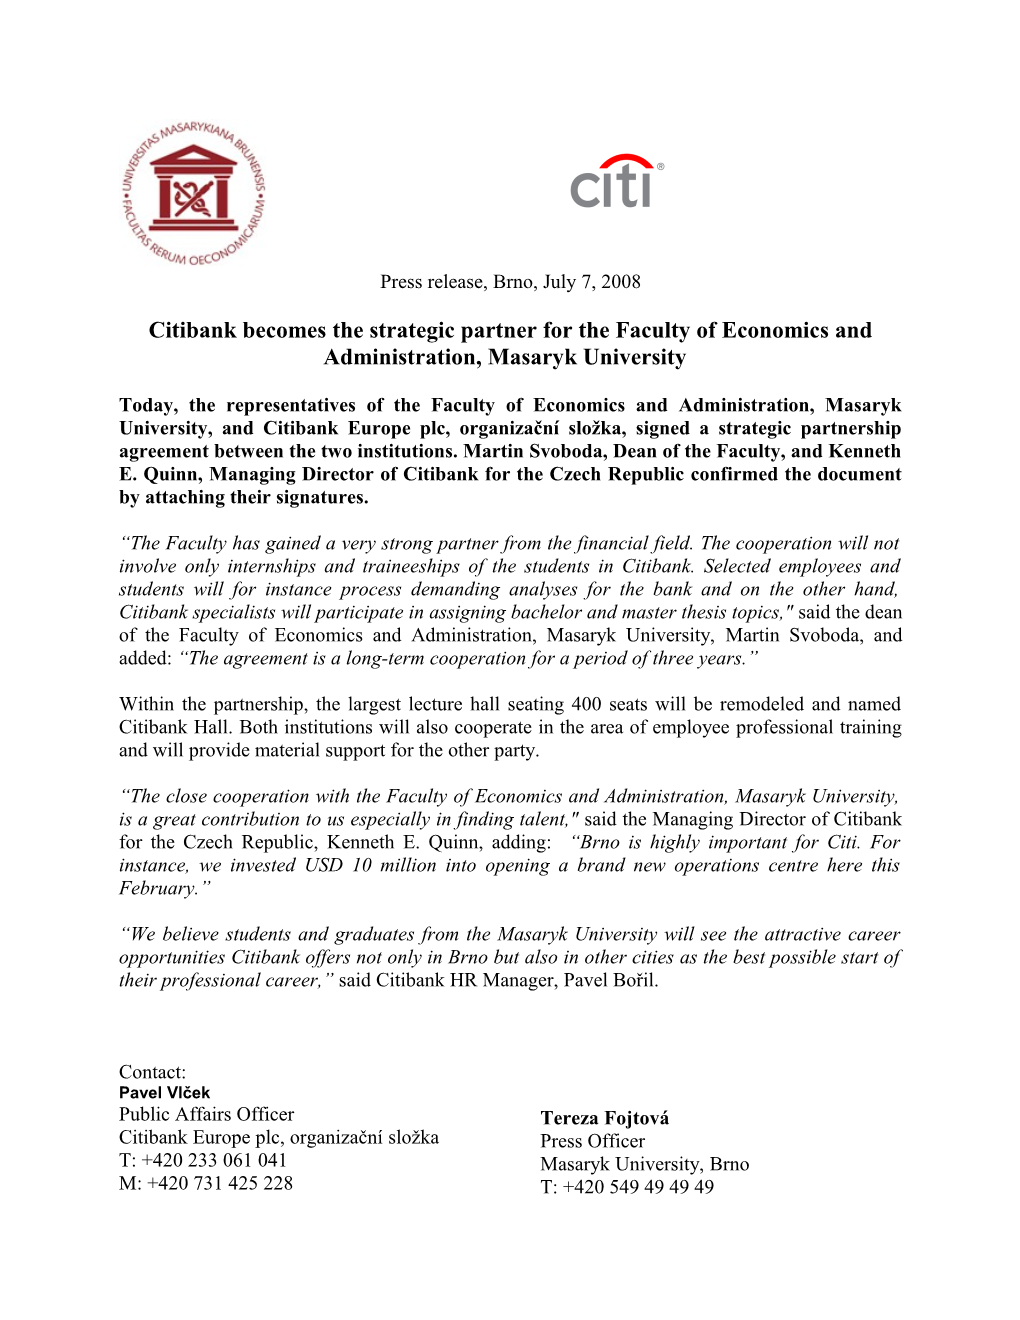 Citibank Becomes the Strategic Partner for the Faculty of Economics and Administration